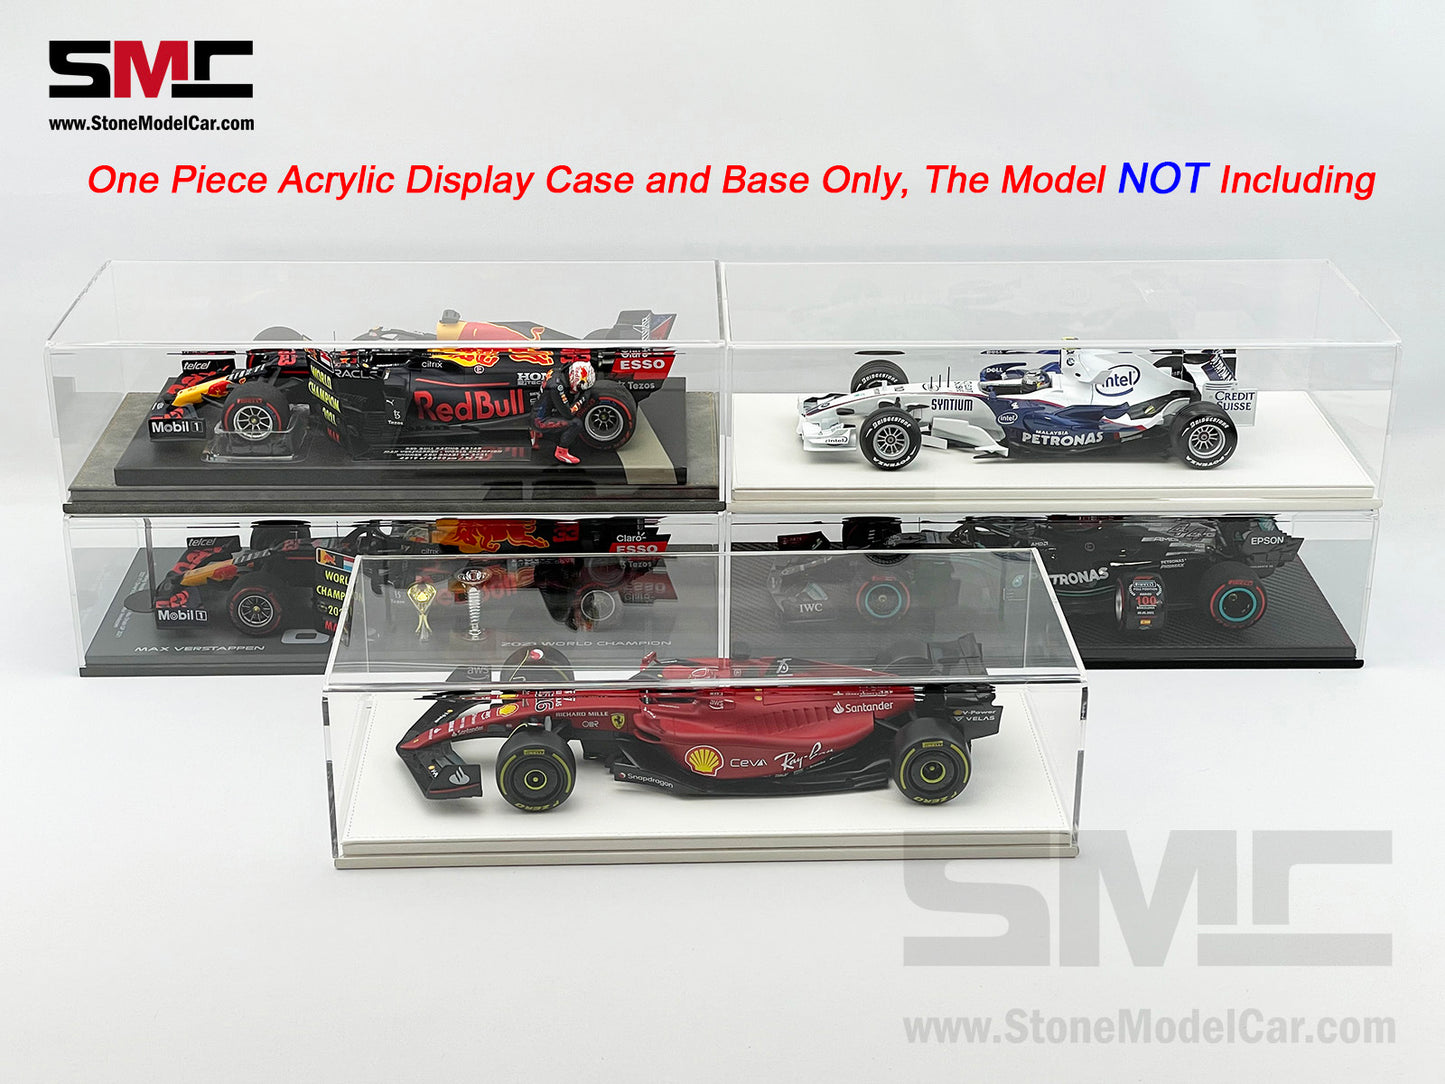 Premium Acrylic Display Cover & Show Case with White Eco-leather Base for 1:18 Car Models